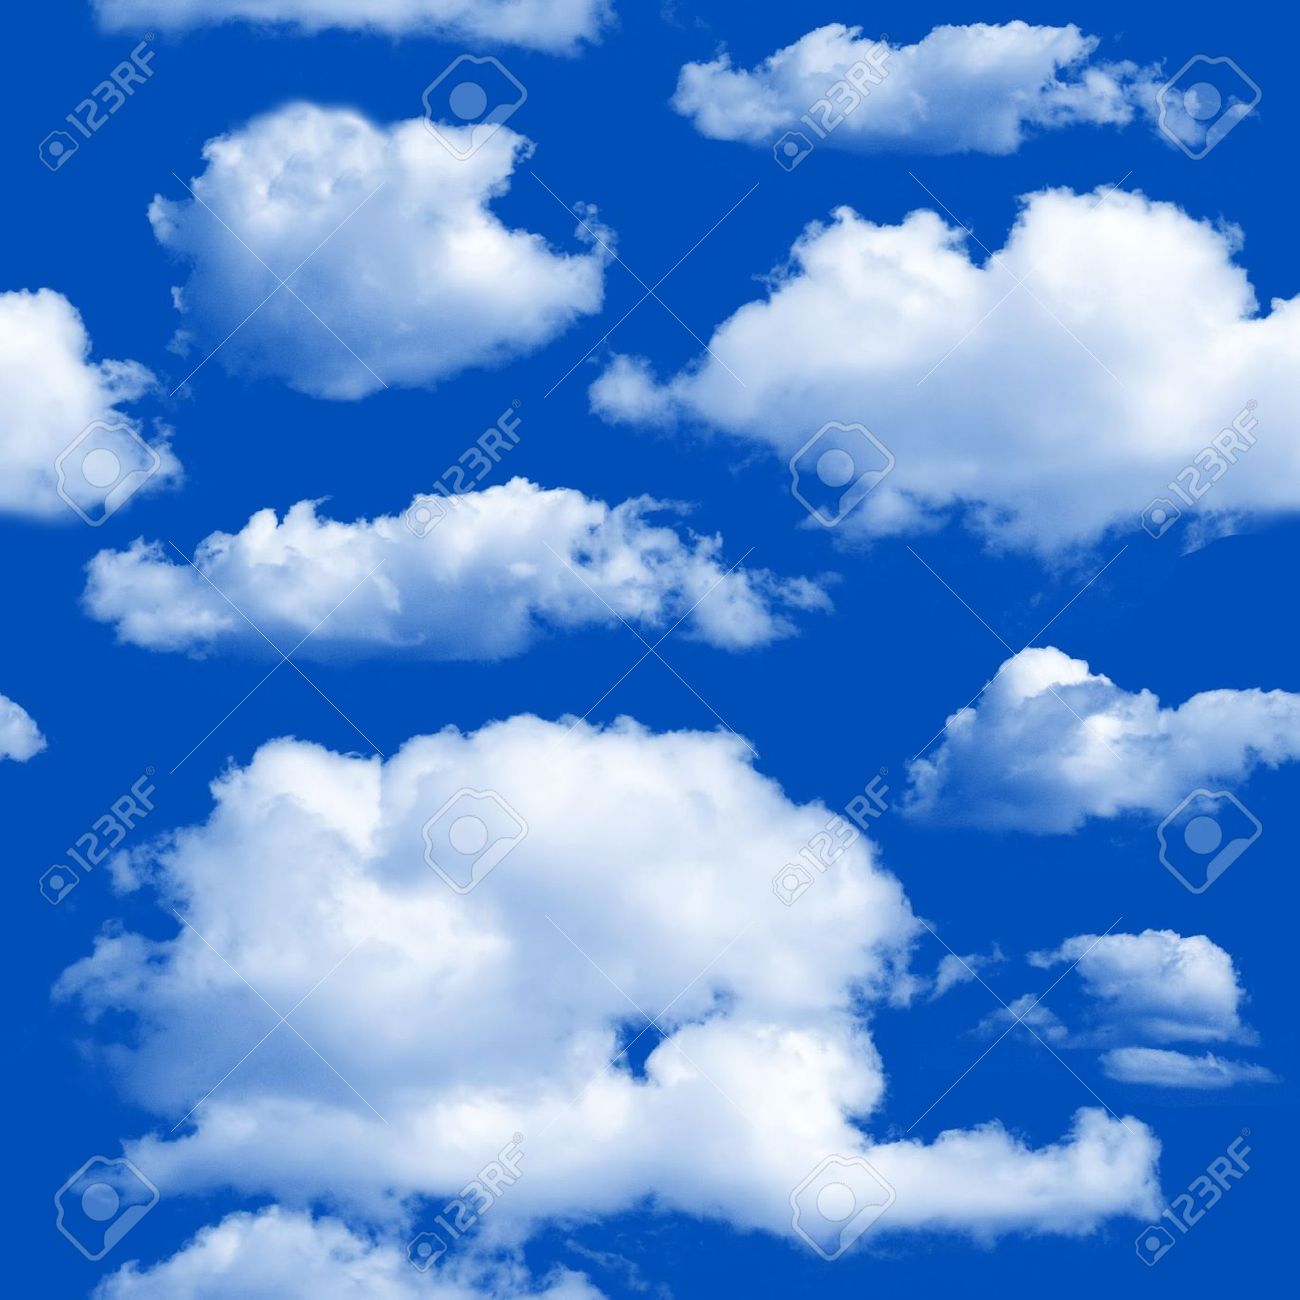 Clouds Seamless Background Texture Pattern For Continuous